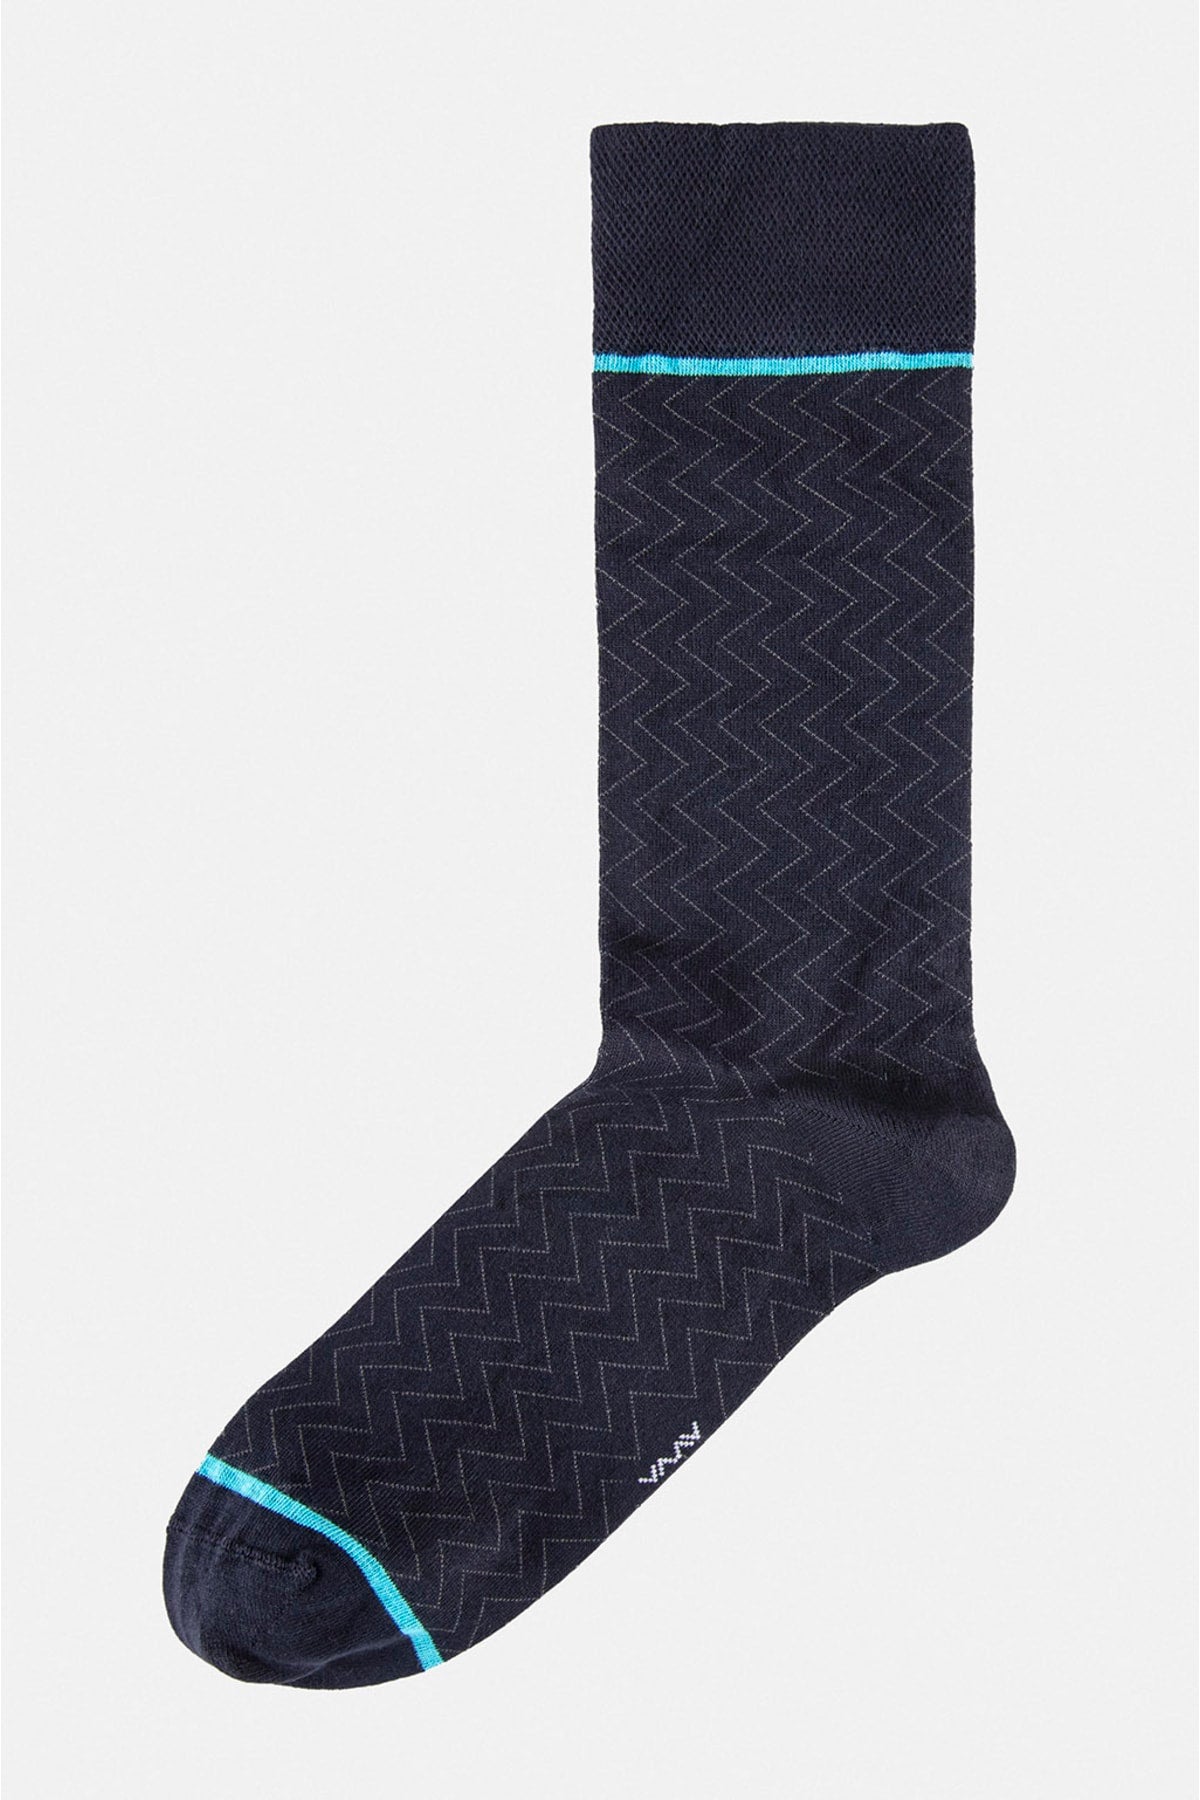 Men's Navy Bamboo Society with 2 Bamboo Society with Plain/Patterned Patterned A22y8511